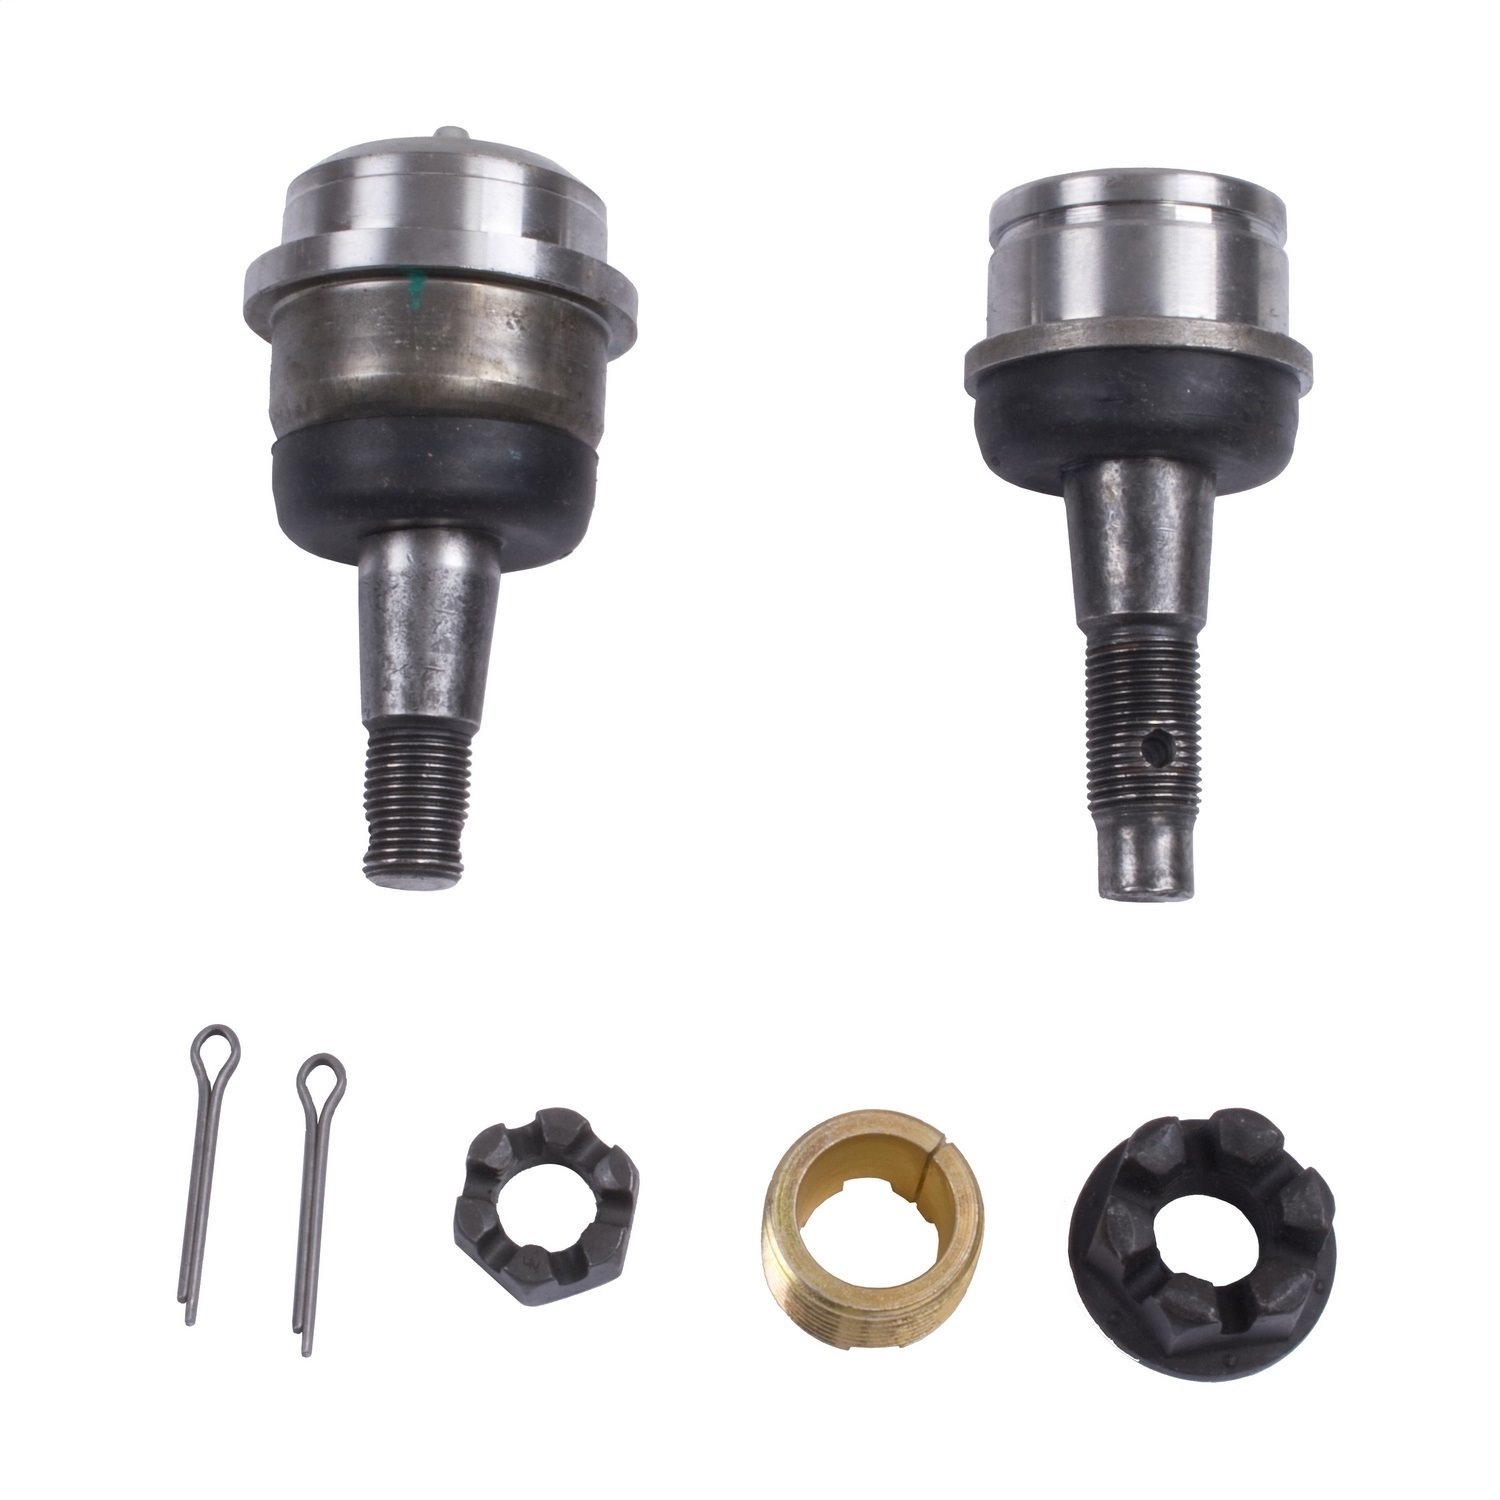 This Ball Joint kit fits 99-04 Jeep Grand Cherokees. It includes the upper and lower ball joints for